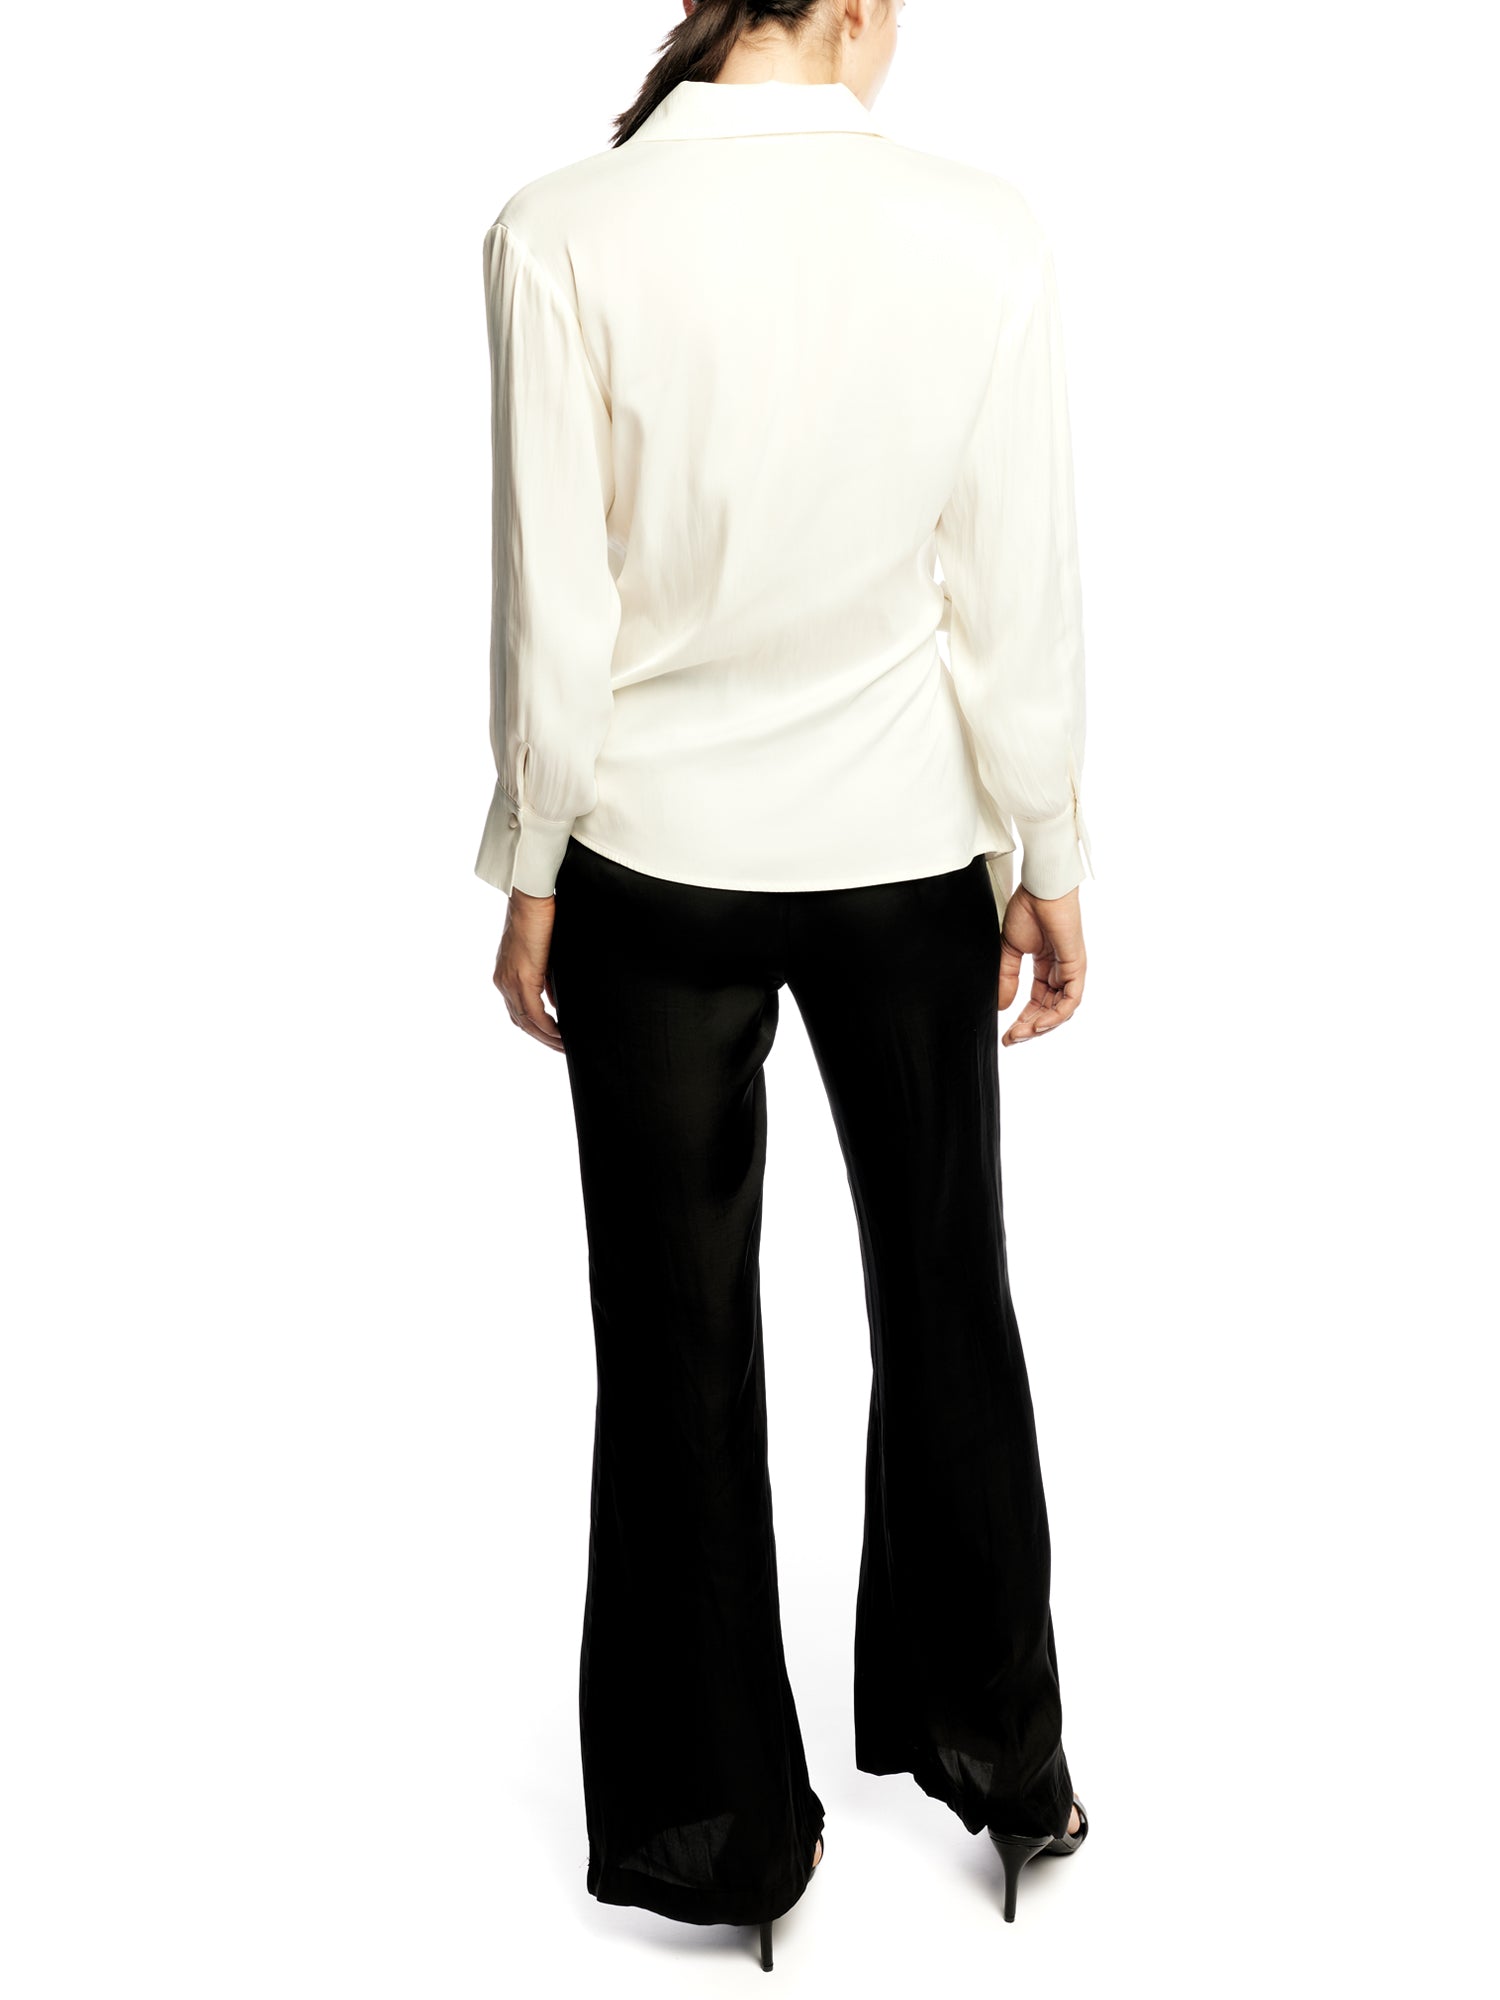 collared, side tie blouse featuring long sleeves with button cuffs in ivory